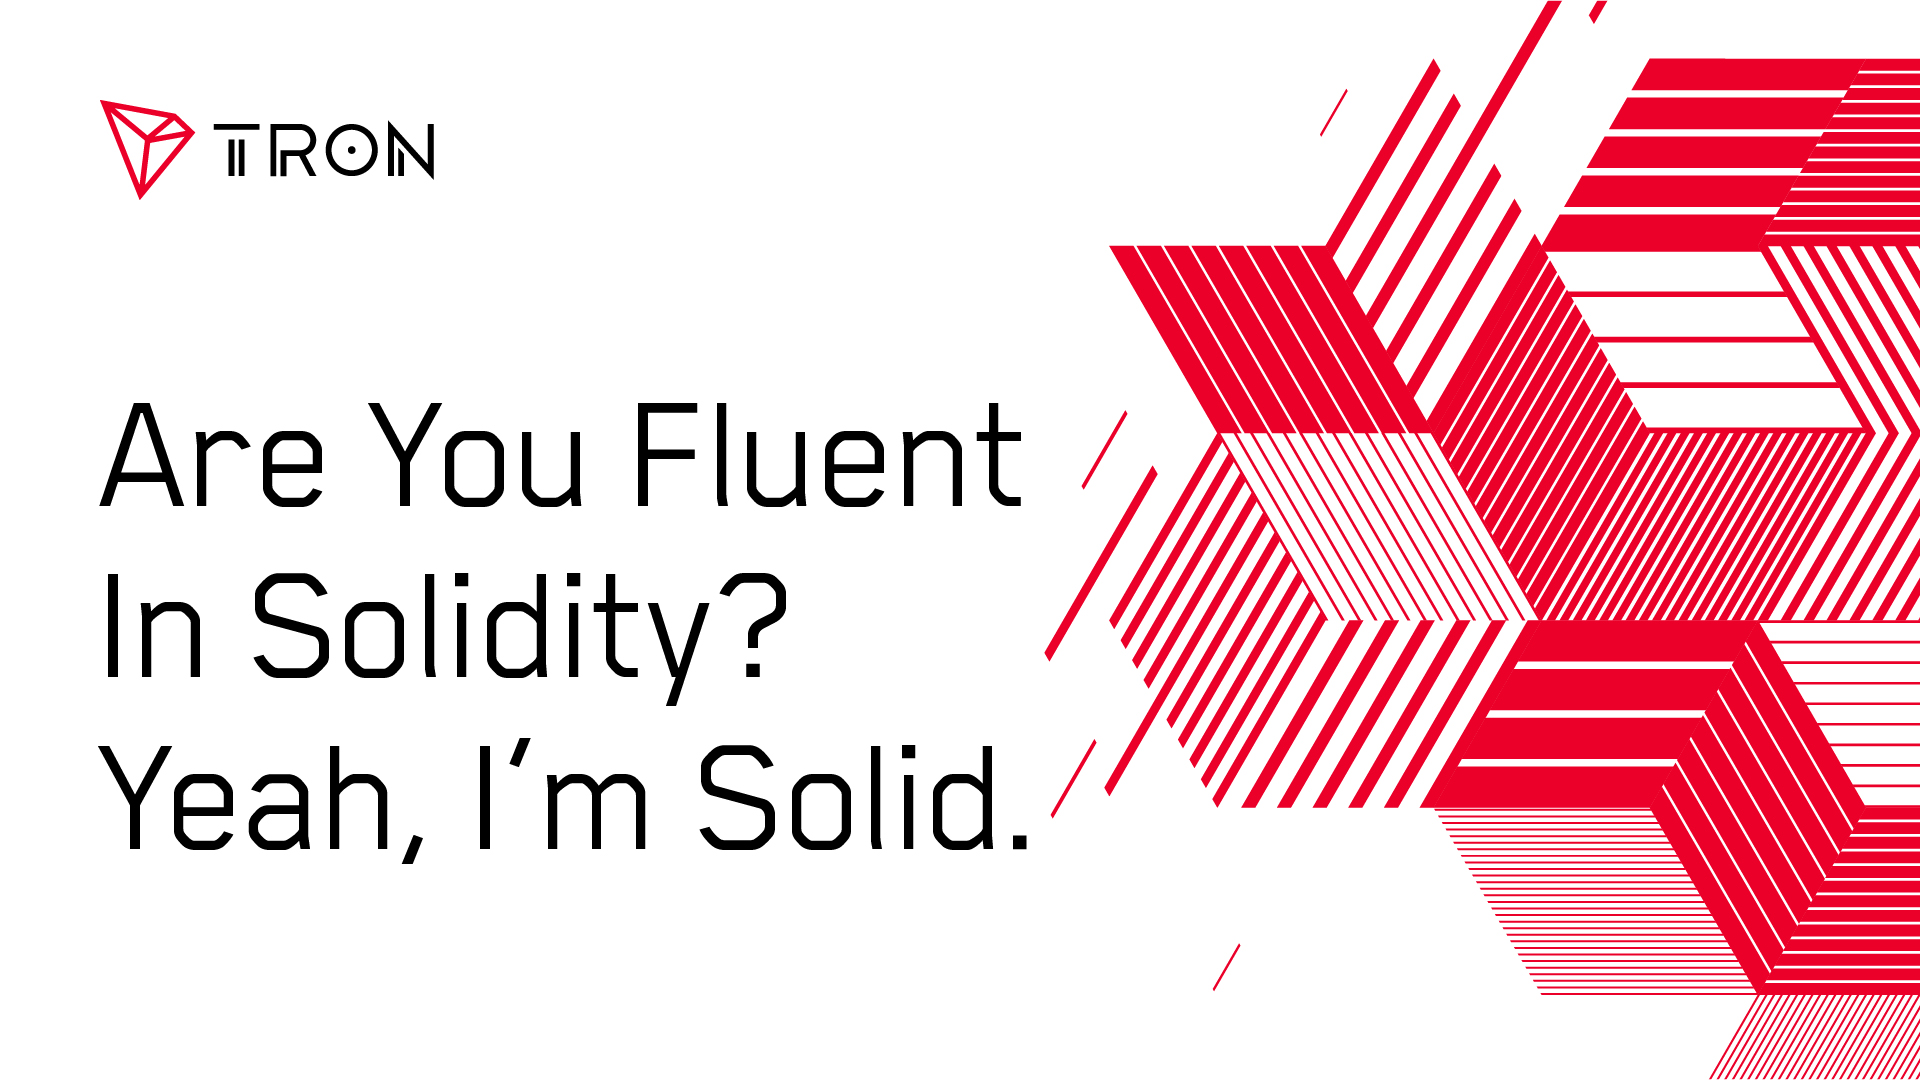 Are you fluent in Solidity? Yeah, I’m solid. TRON is, too.